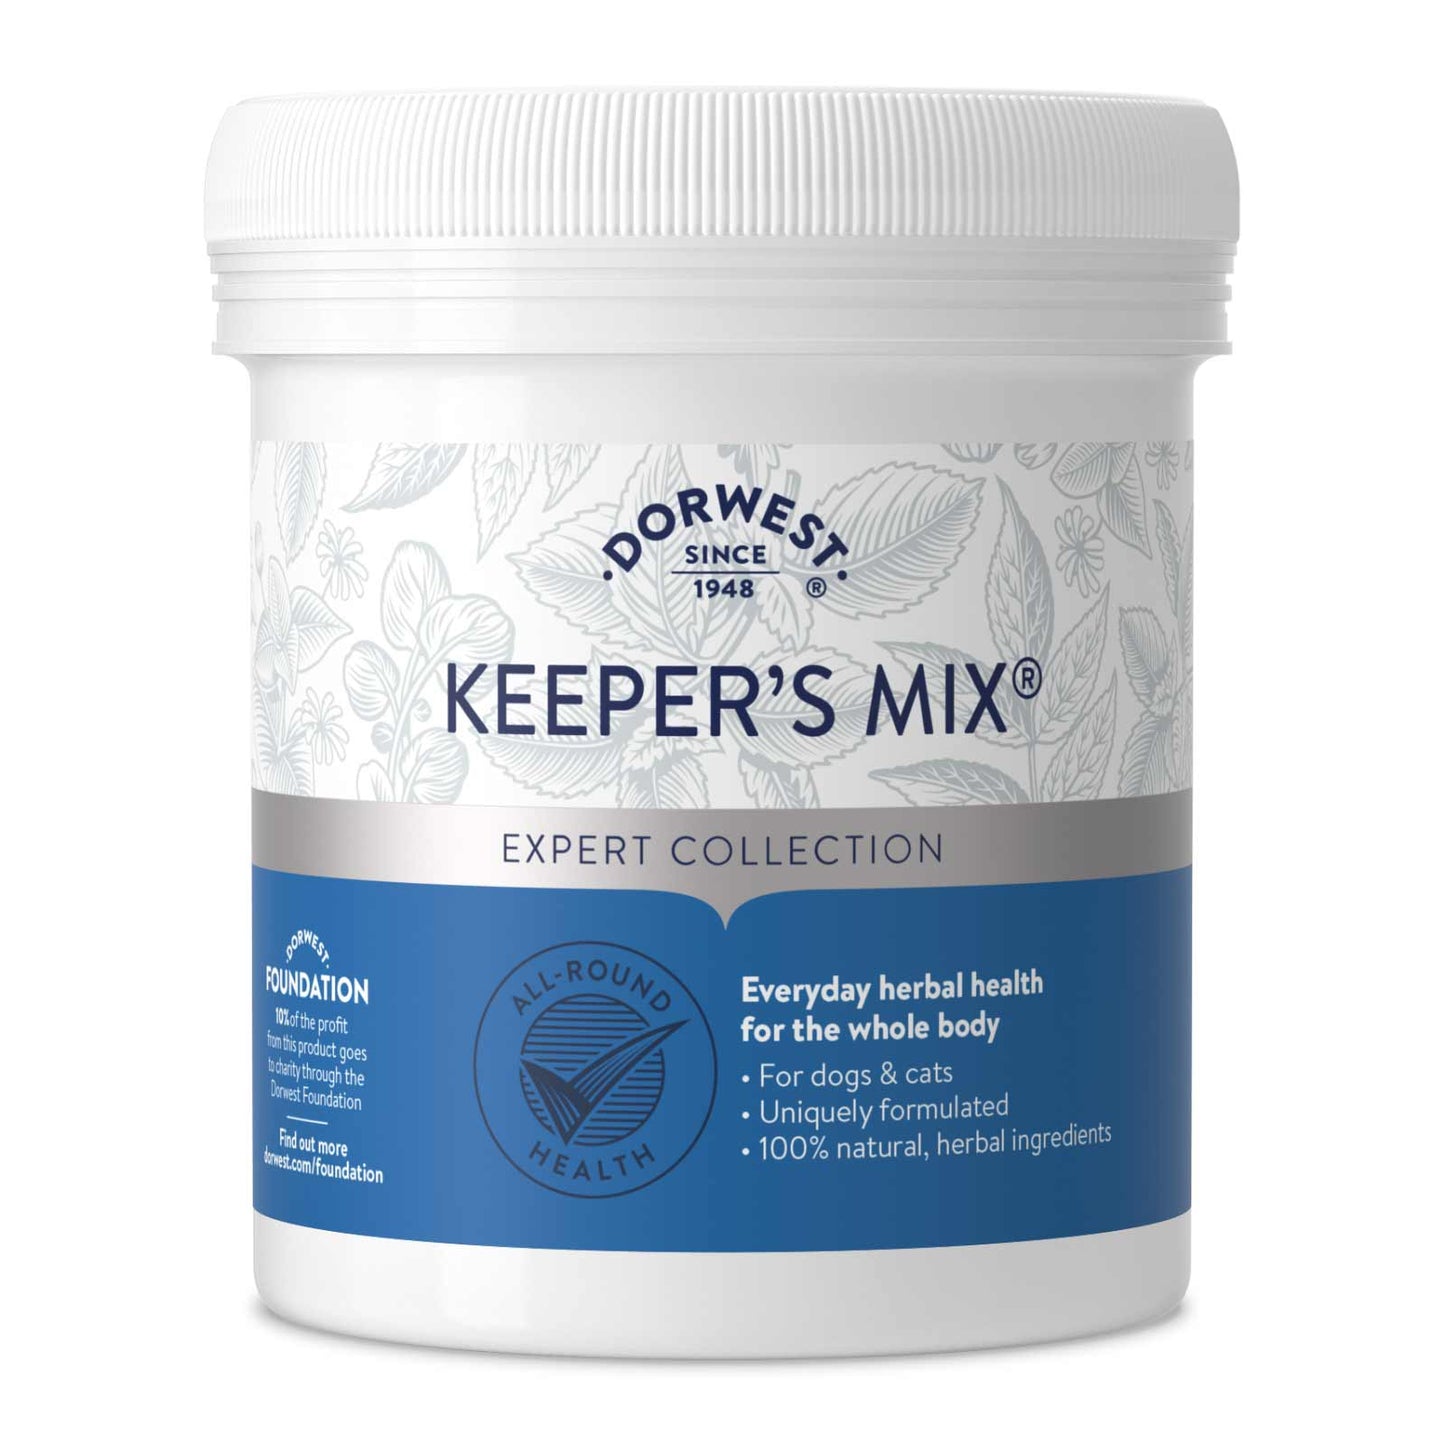 Dorwest Keeper's Mix Powder For Dogs And Cats (8 Herbs for All-round Health)